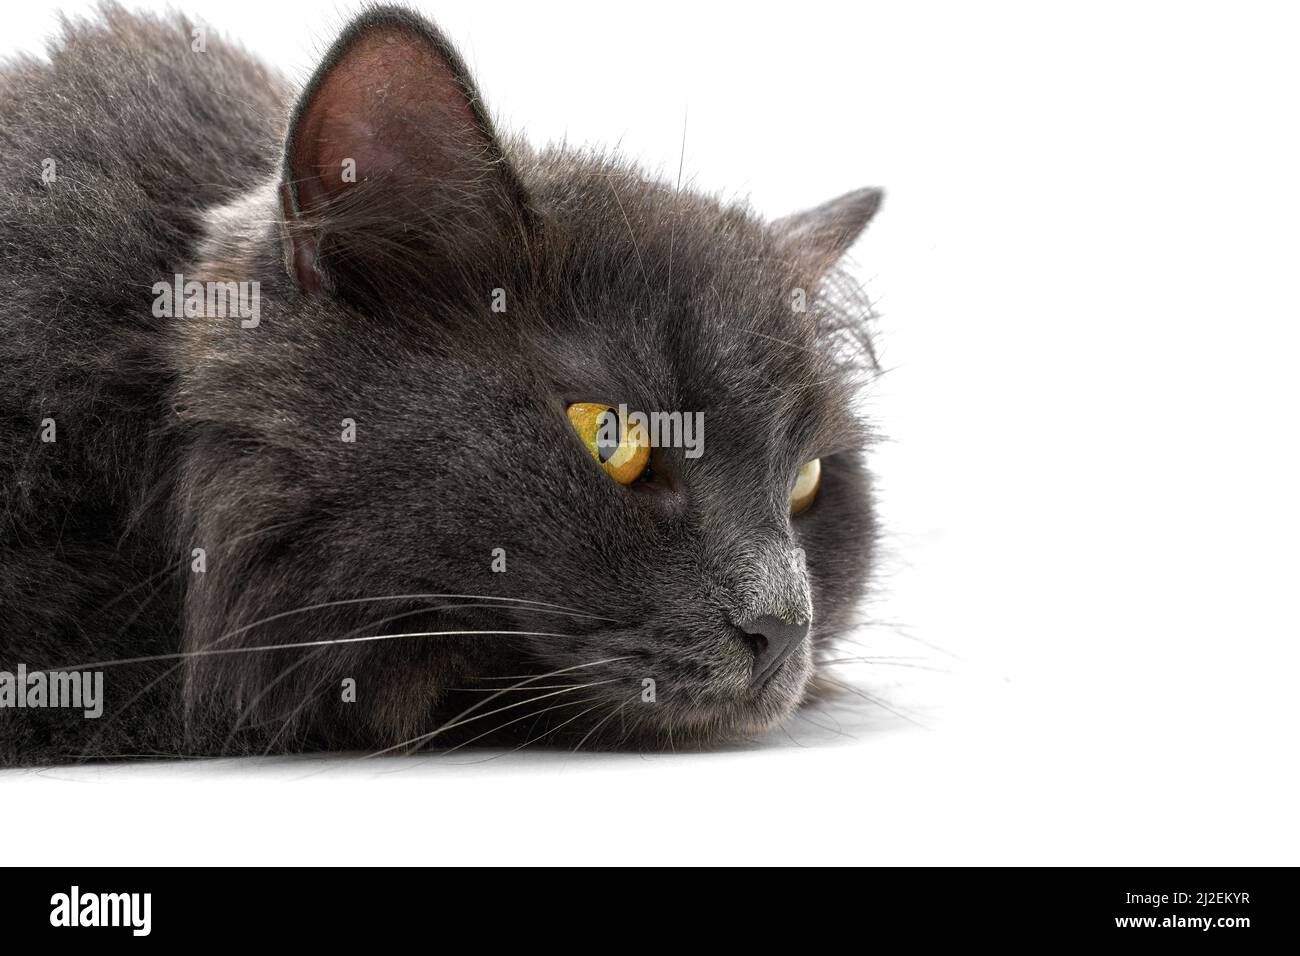 Portrait of the gray cat Nibelung close-up isolated on a white background. Lying gray cat with a pensive look looks ahead Stock Photo